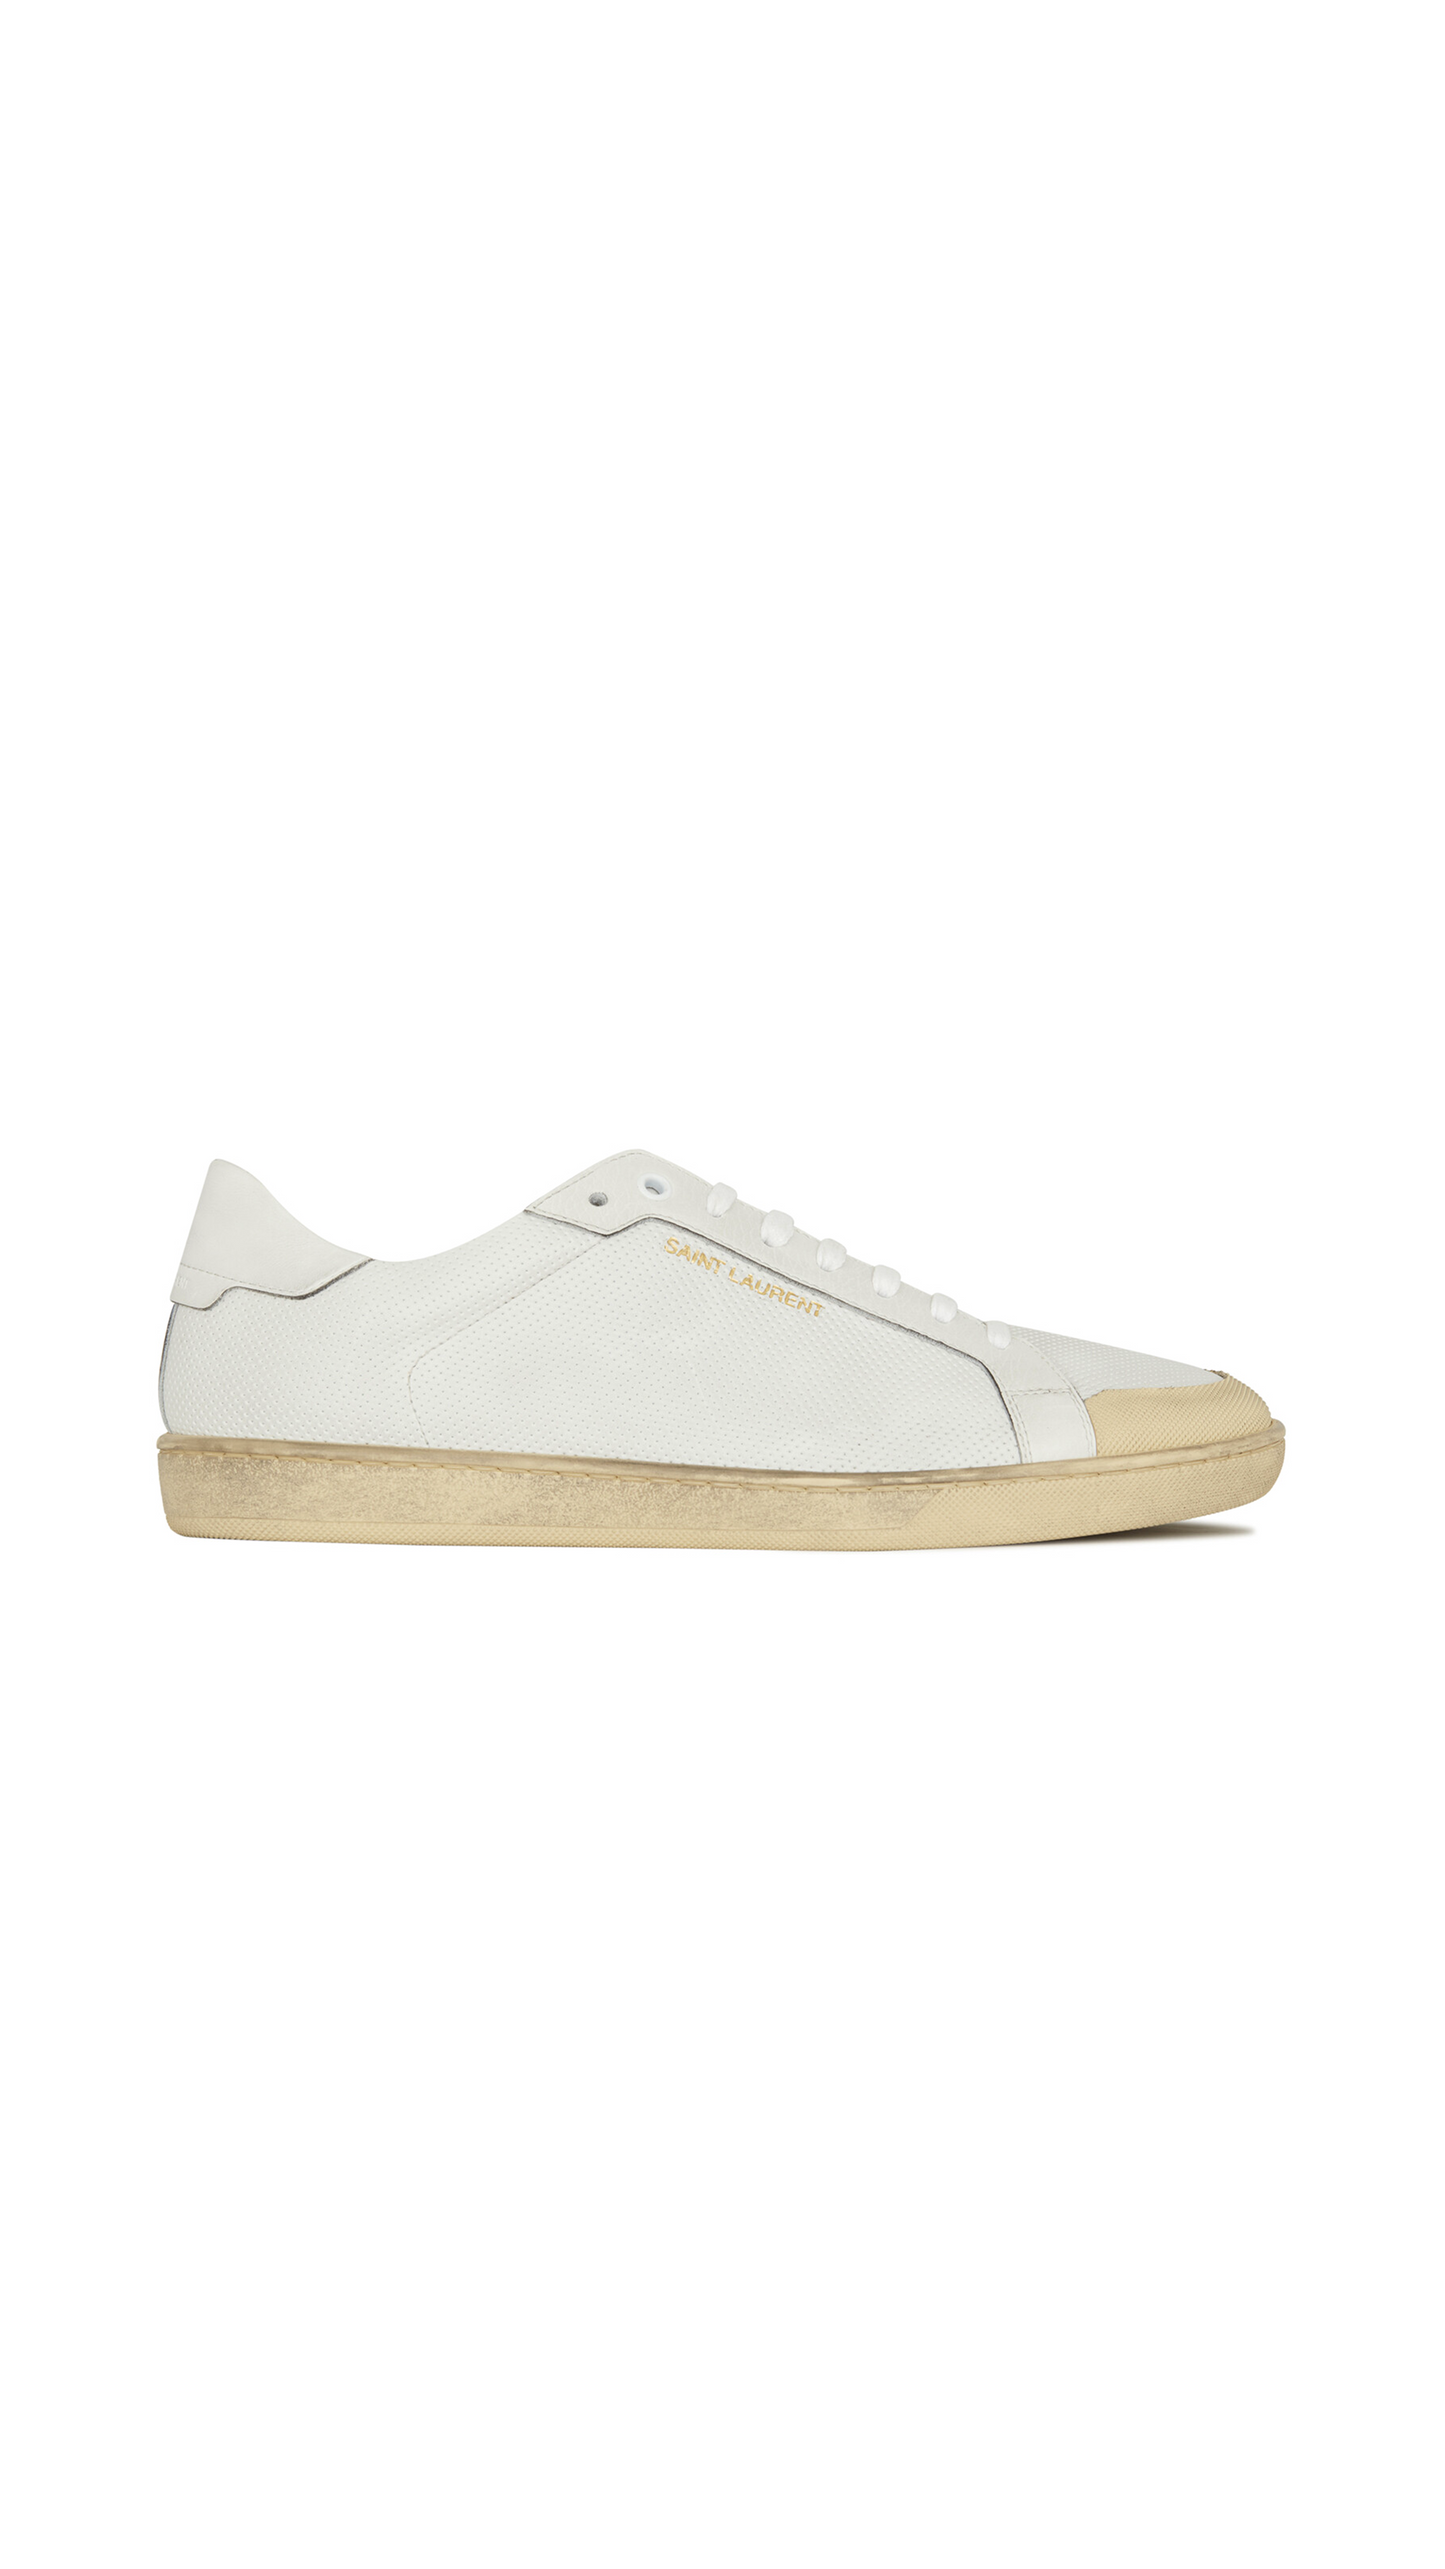 Court Classic SL/39 Sneakers in Perforated Leather -Ivory